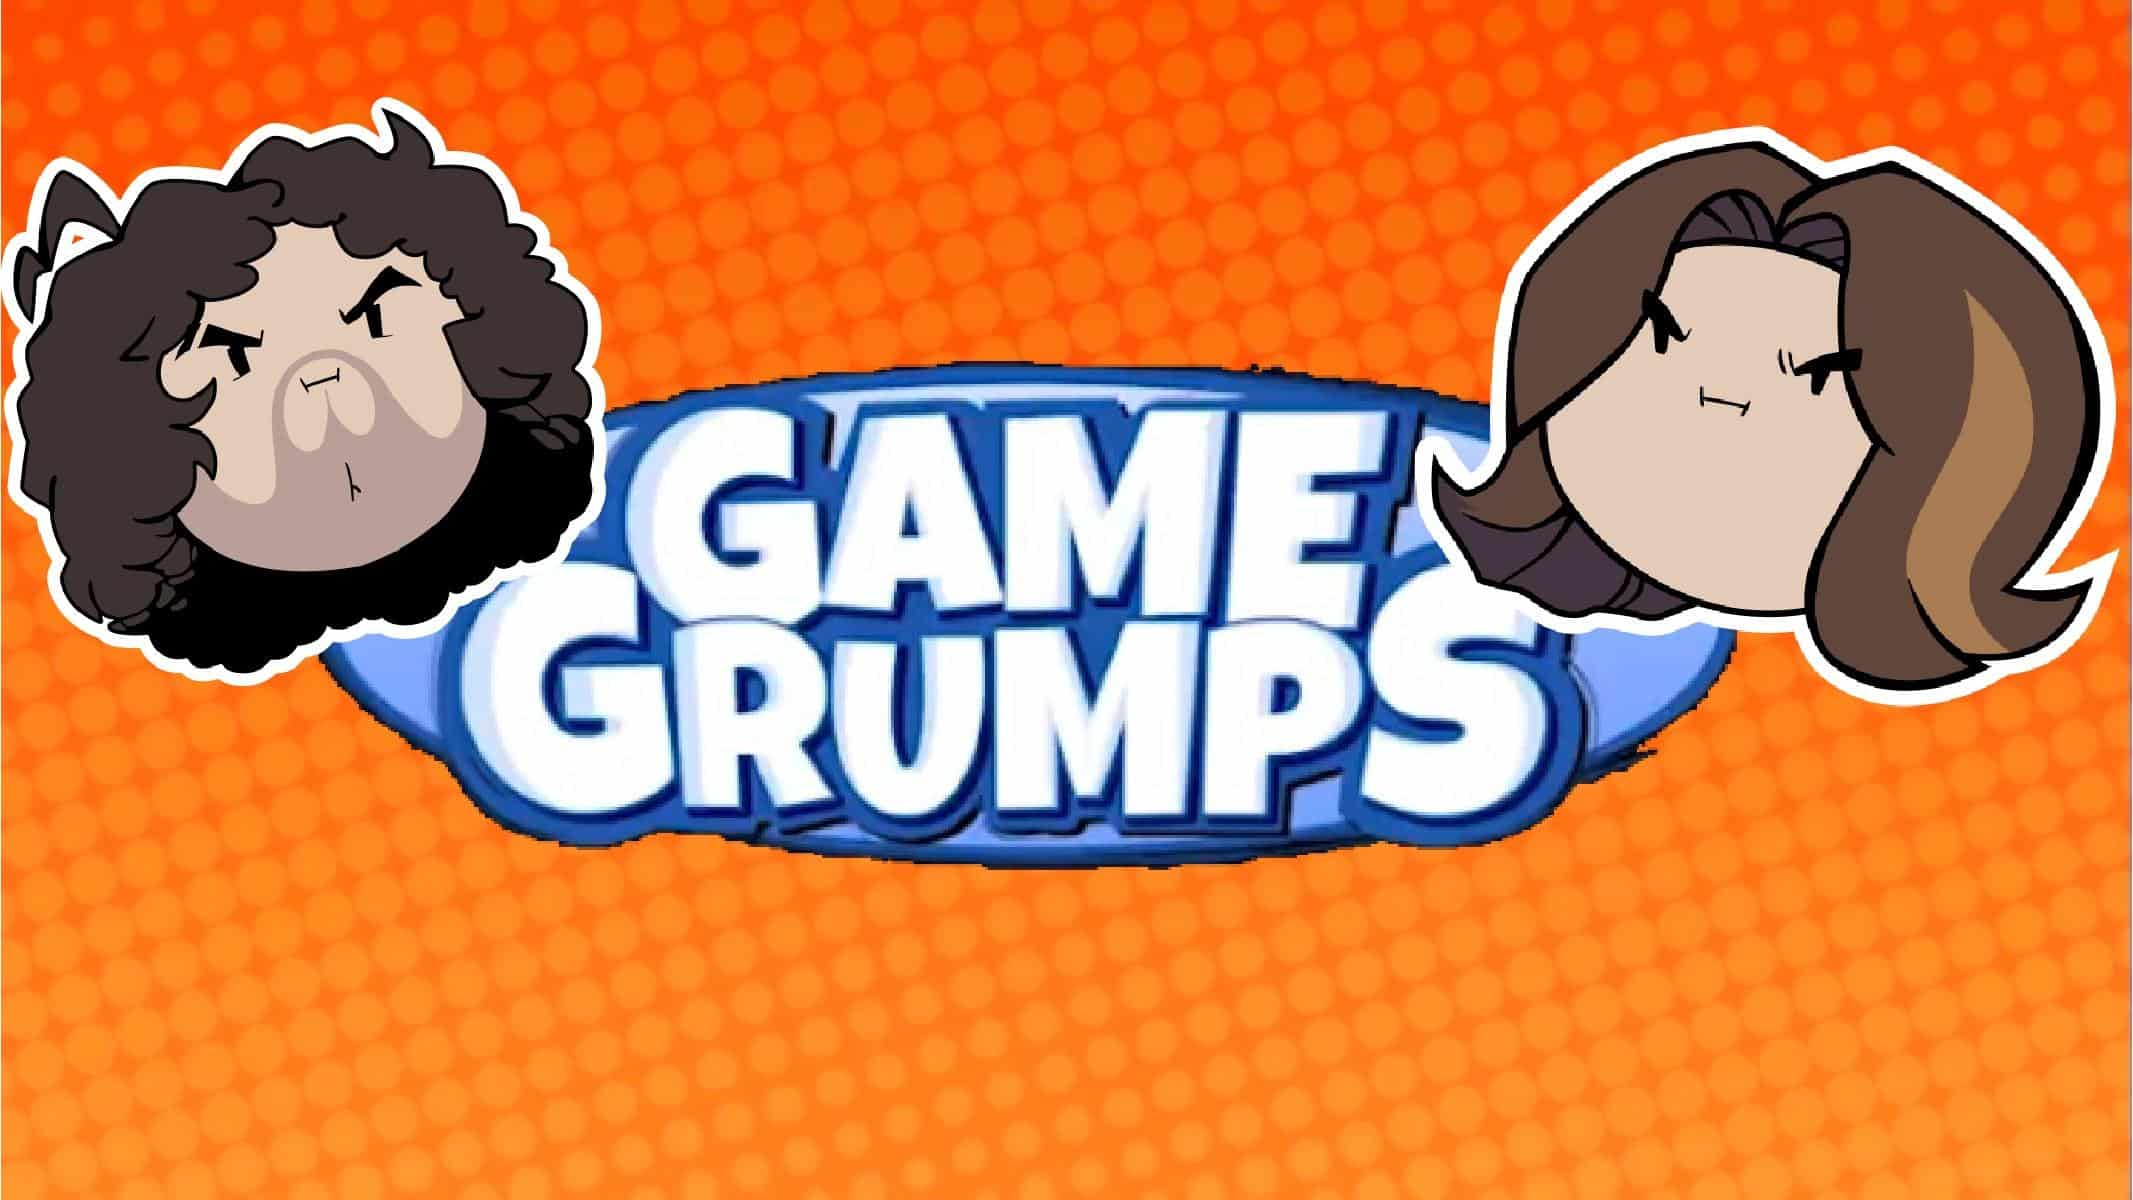 Ding dong game grumps